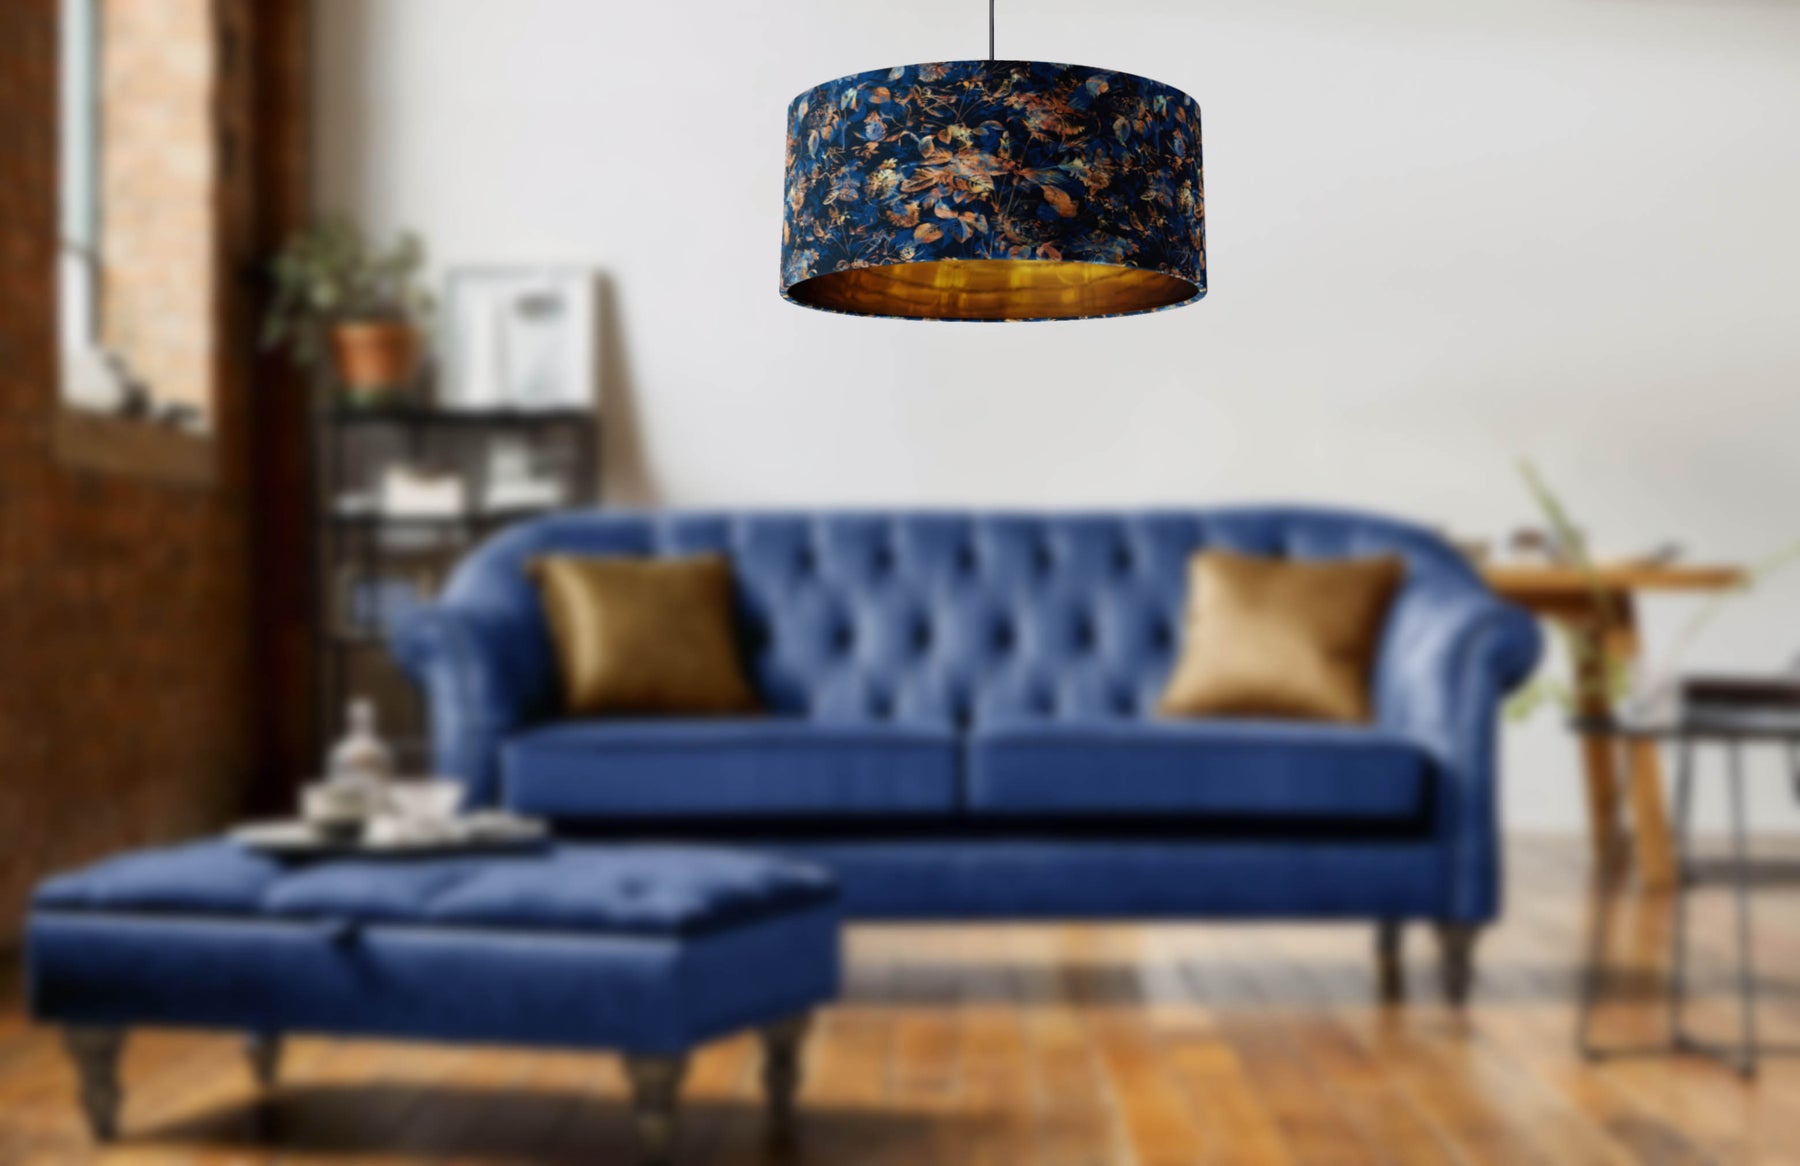 Picture of an extra large lampshade in a living room setting